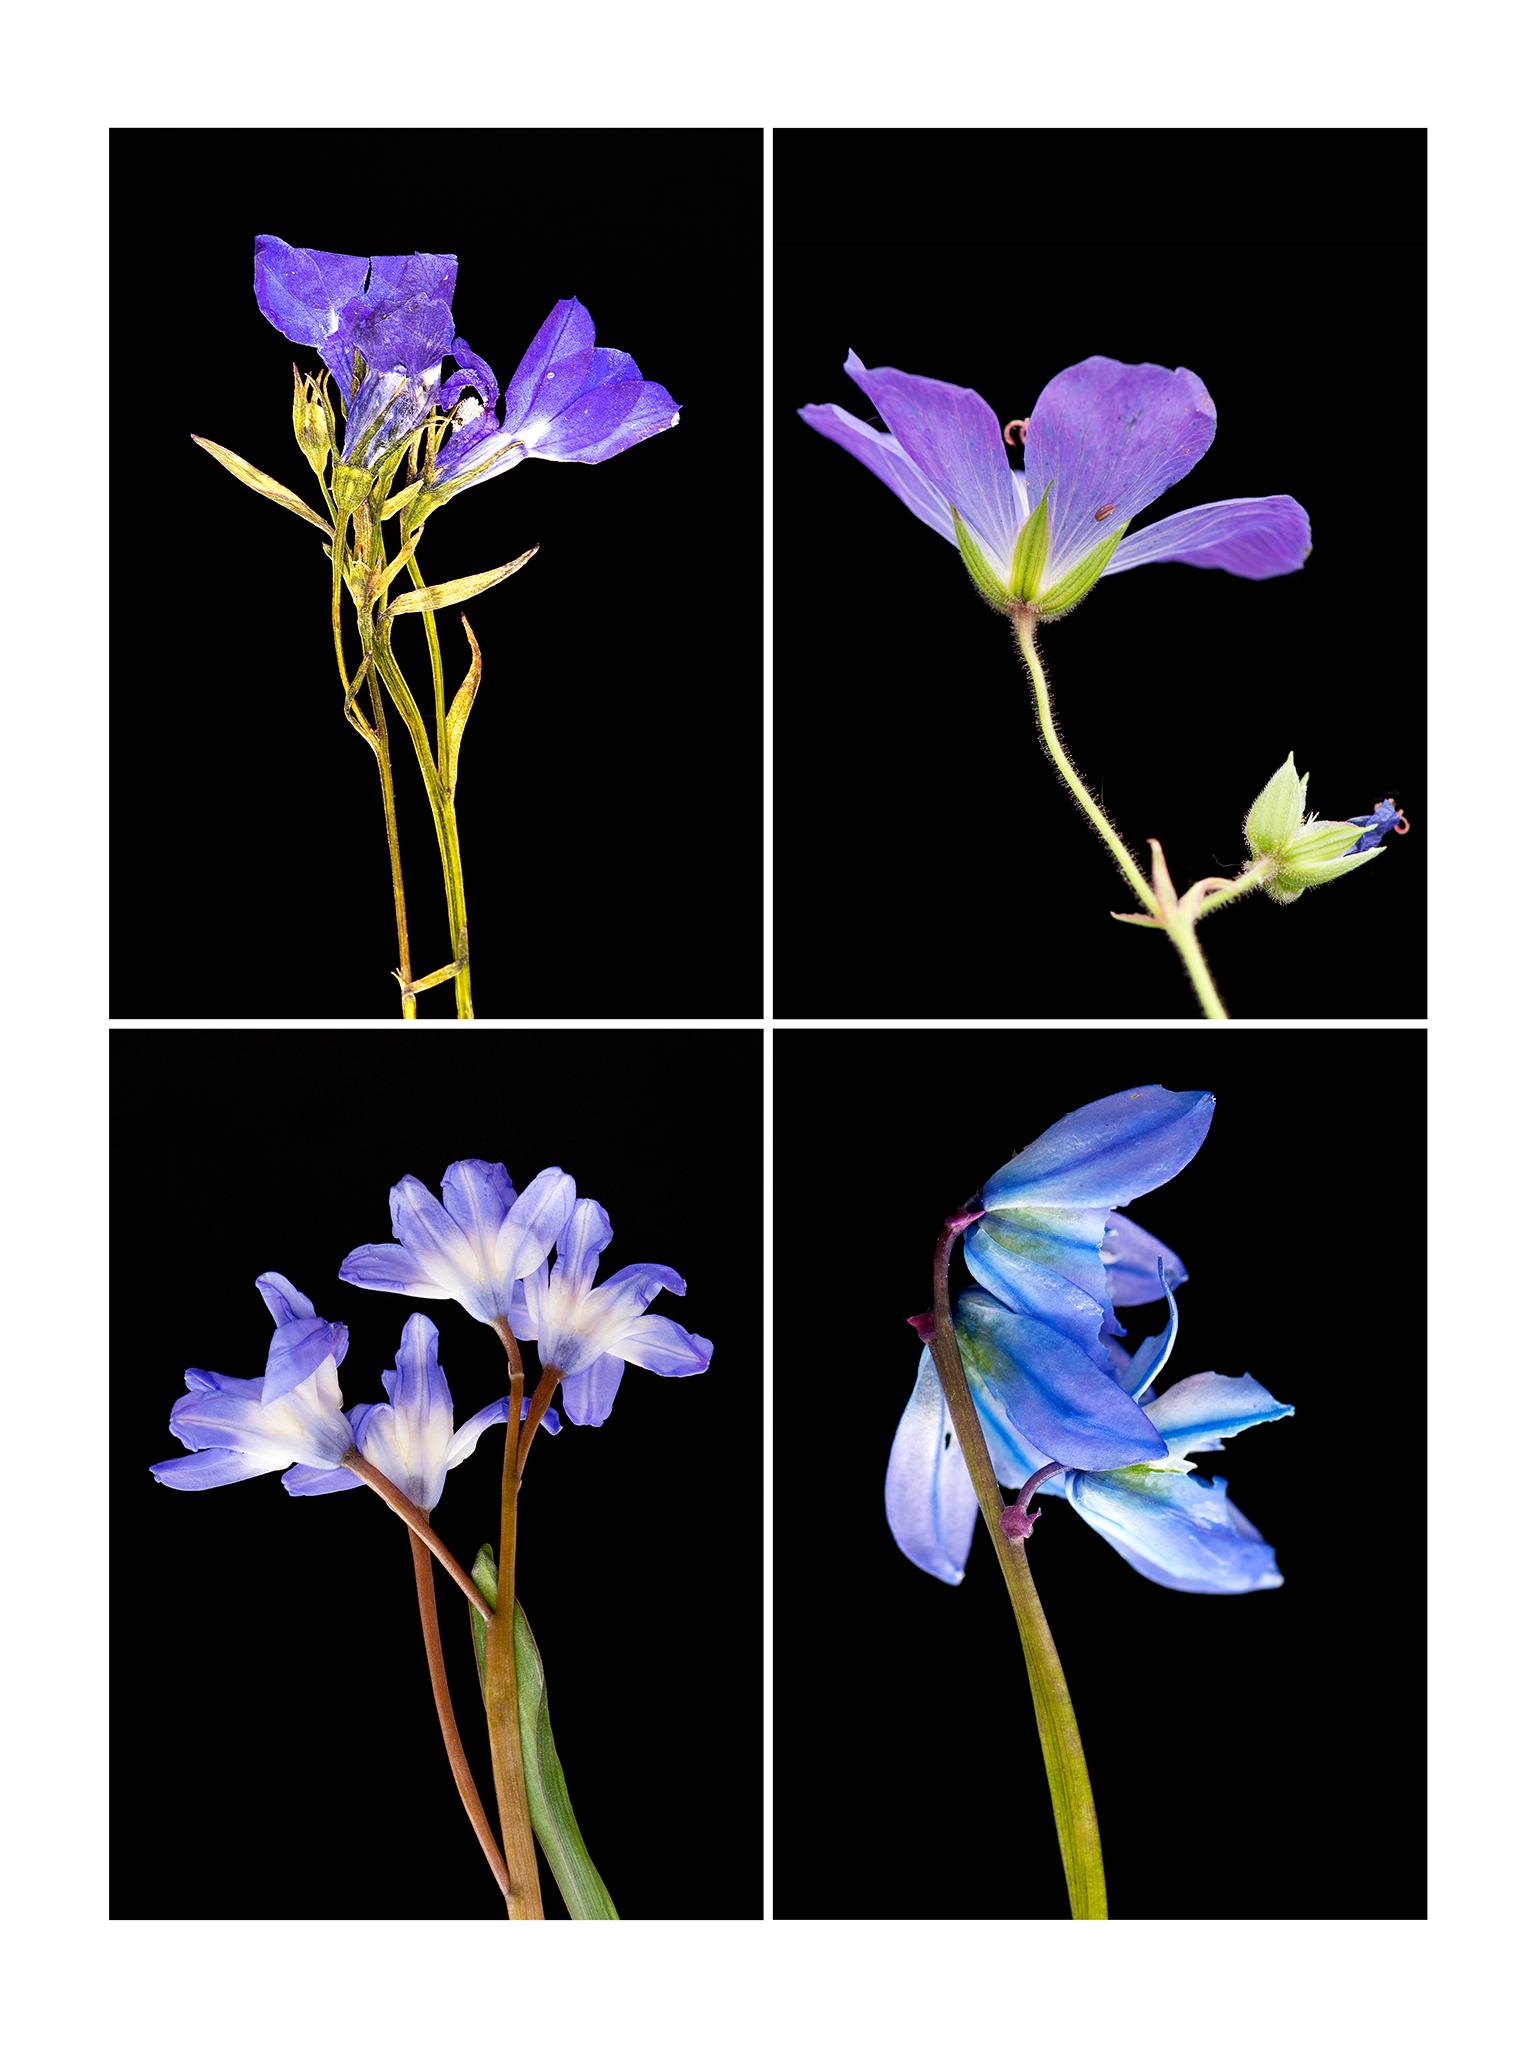 Lobelia, botanical pressed flower photograph by Martin Parker.

Martin's innovative photographs are created from plants grown by himself in his garden and greenhouse in Cambridge. A keen horticulturist, he cultivates his own plants and flowers, the